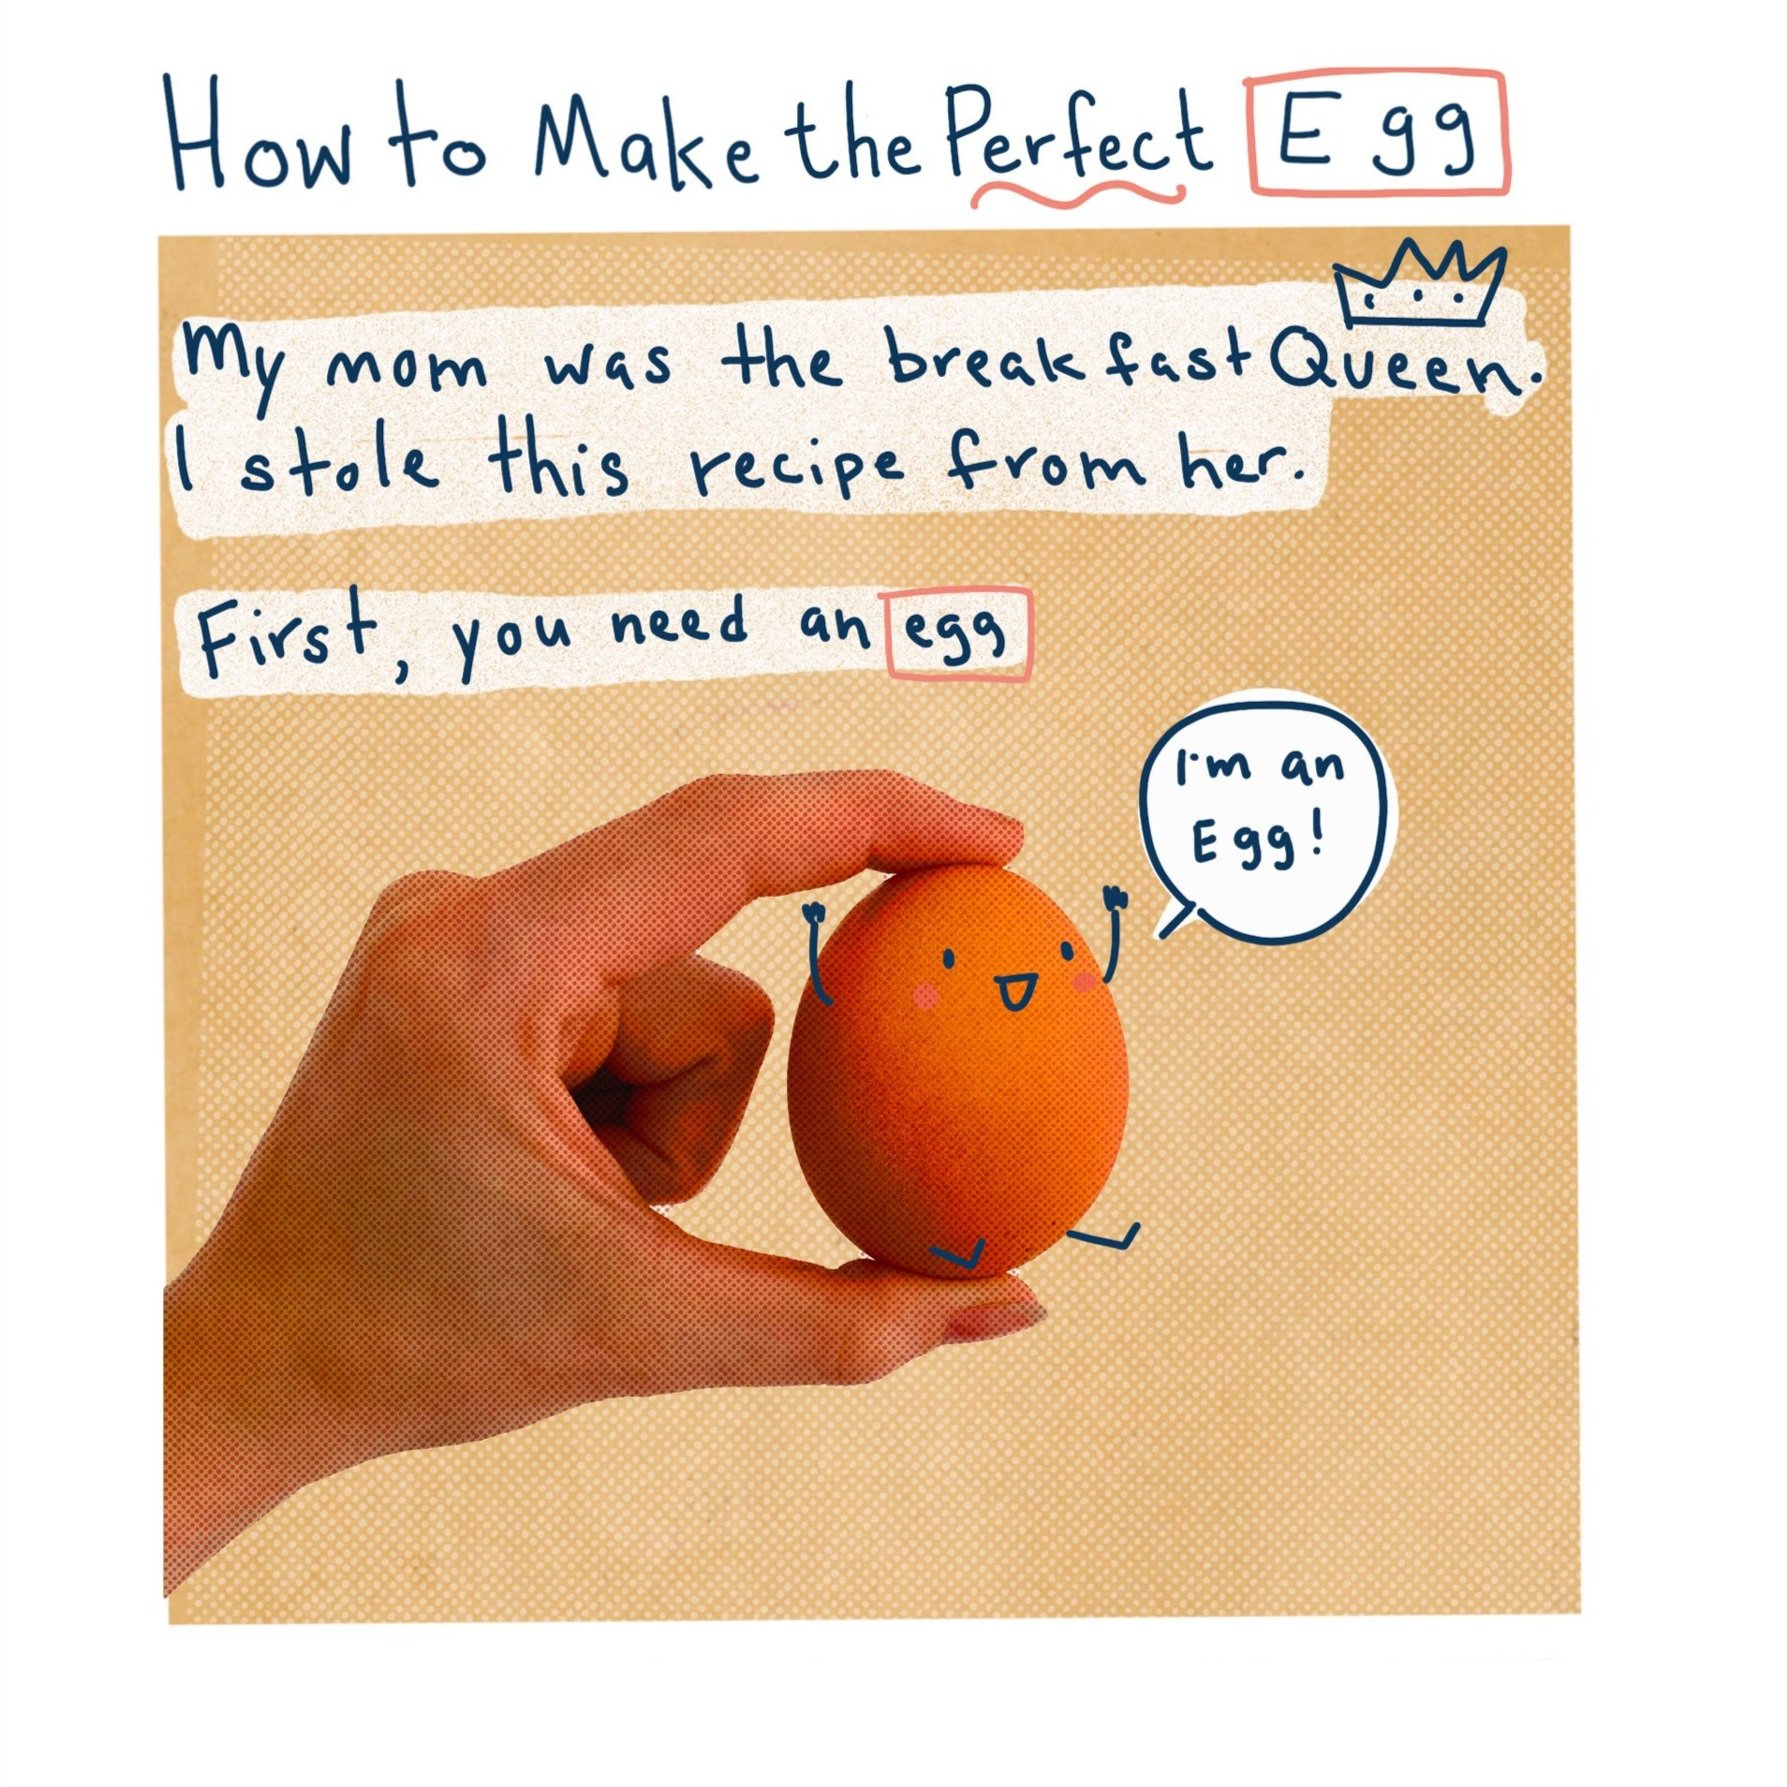 A comic about how to make the perfect egg that I stole from my mom. By Kendra Minadeo